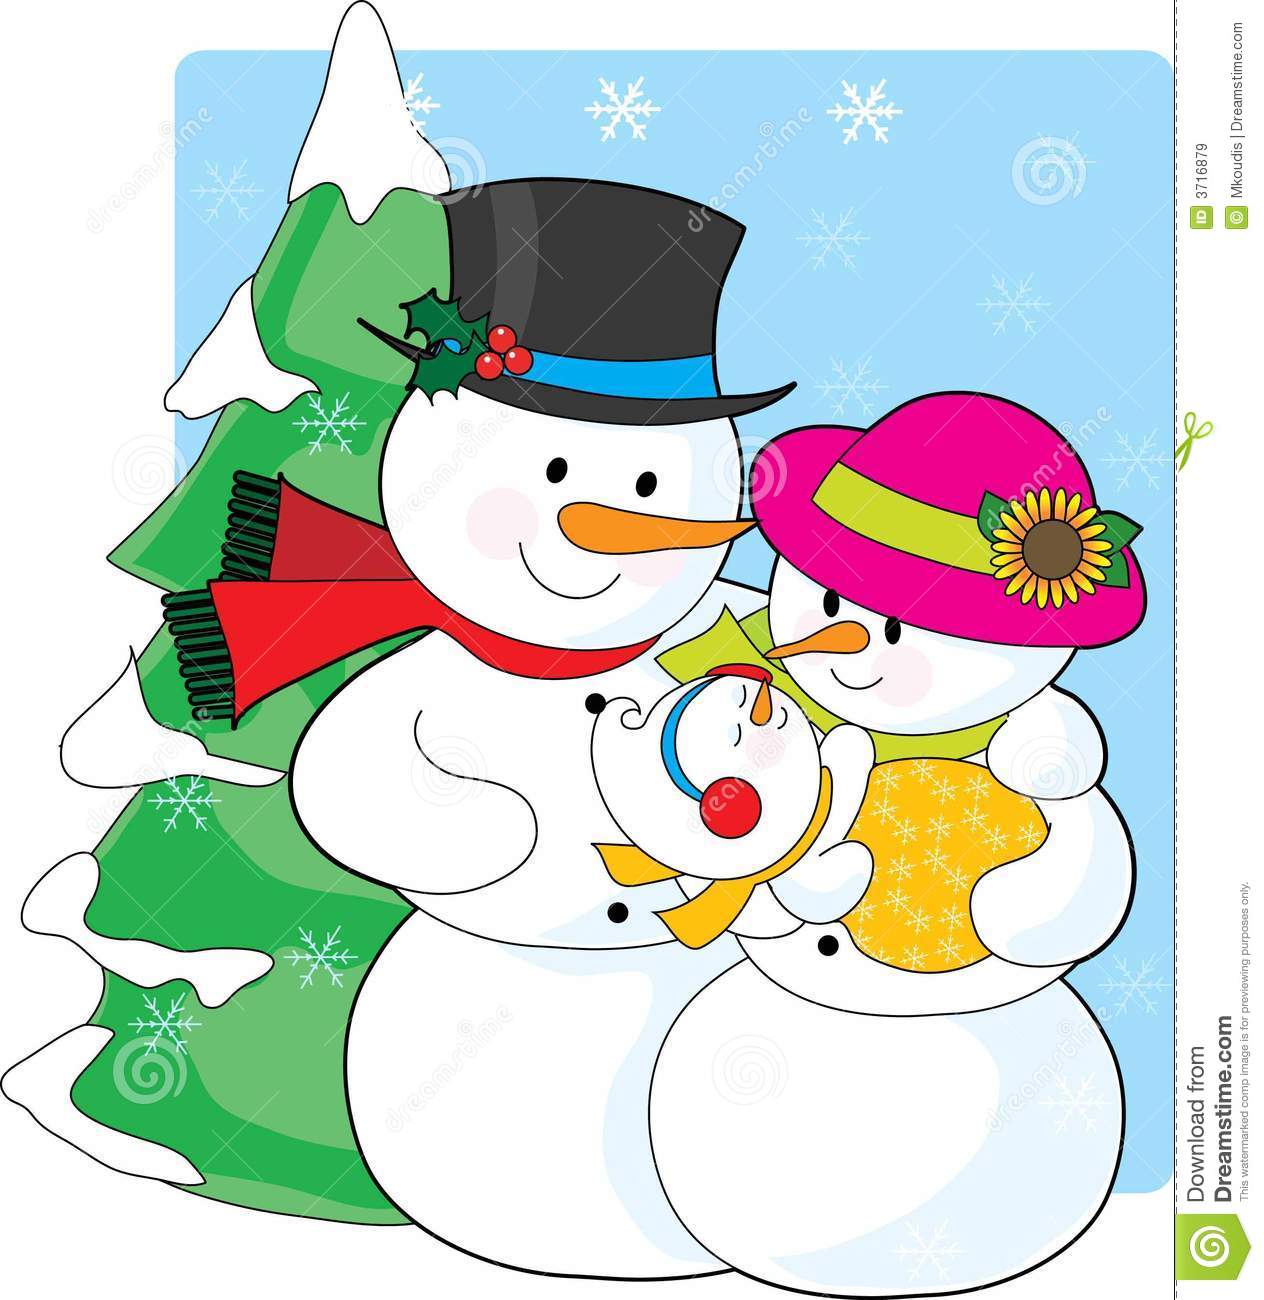 Snowman Family Royalty Free Stock Images   Image  3716879